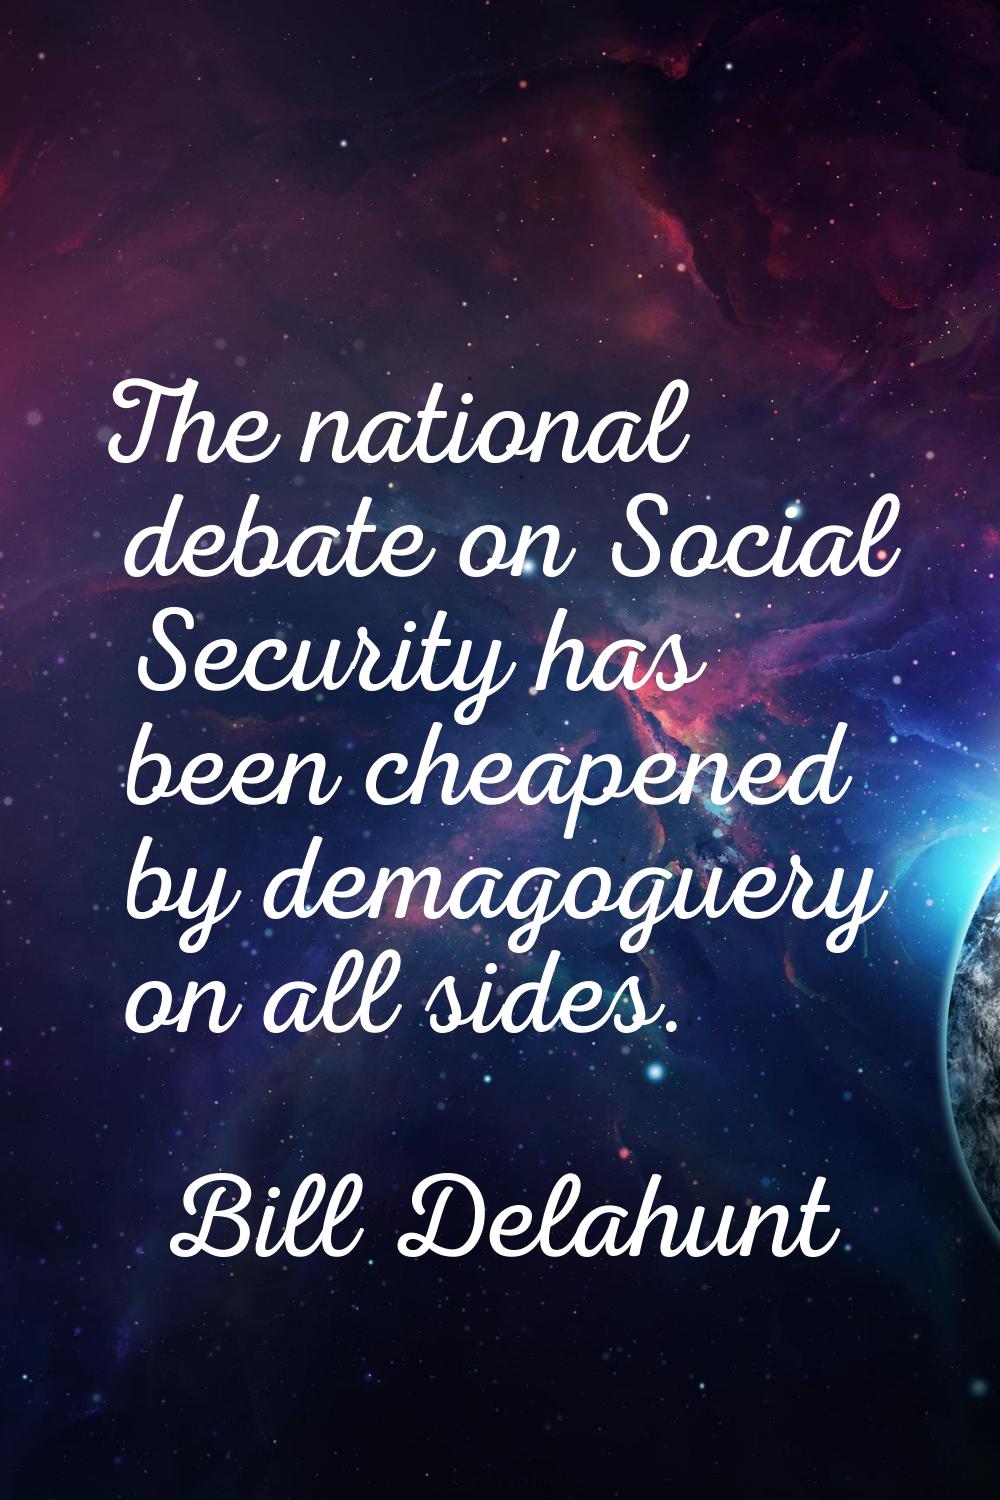 The national debate on Social Security has been cheapened by demagoguery on all sides.